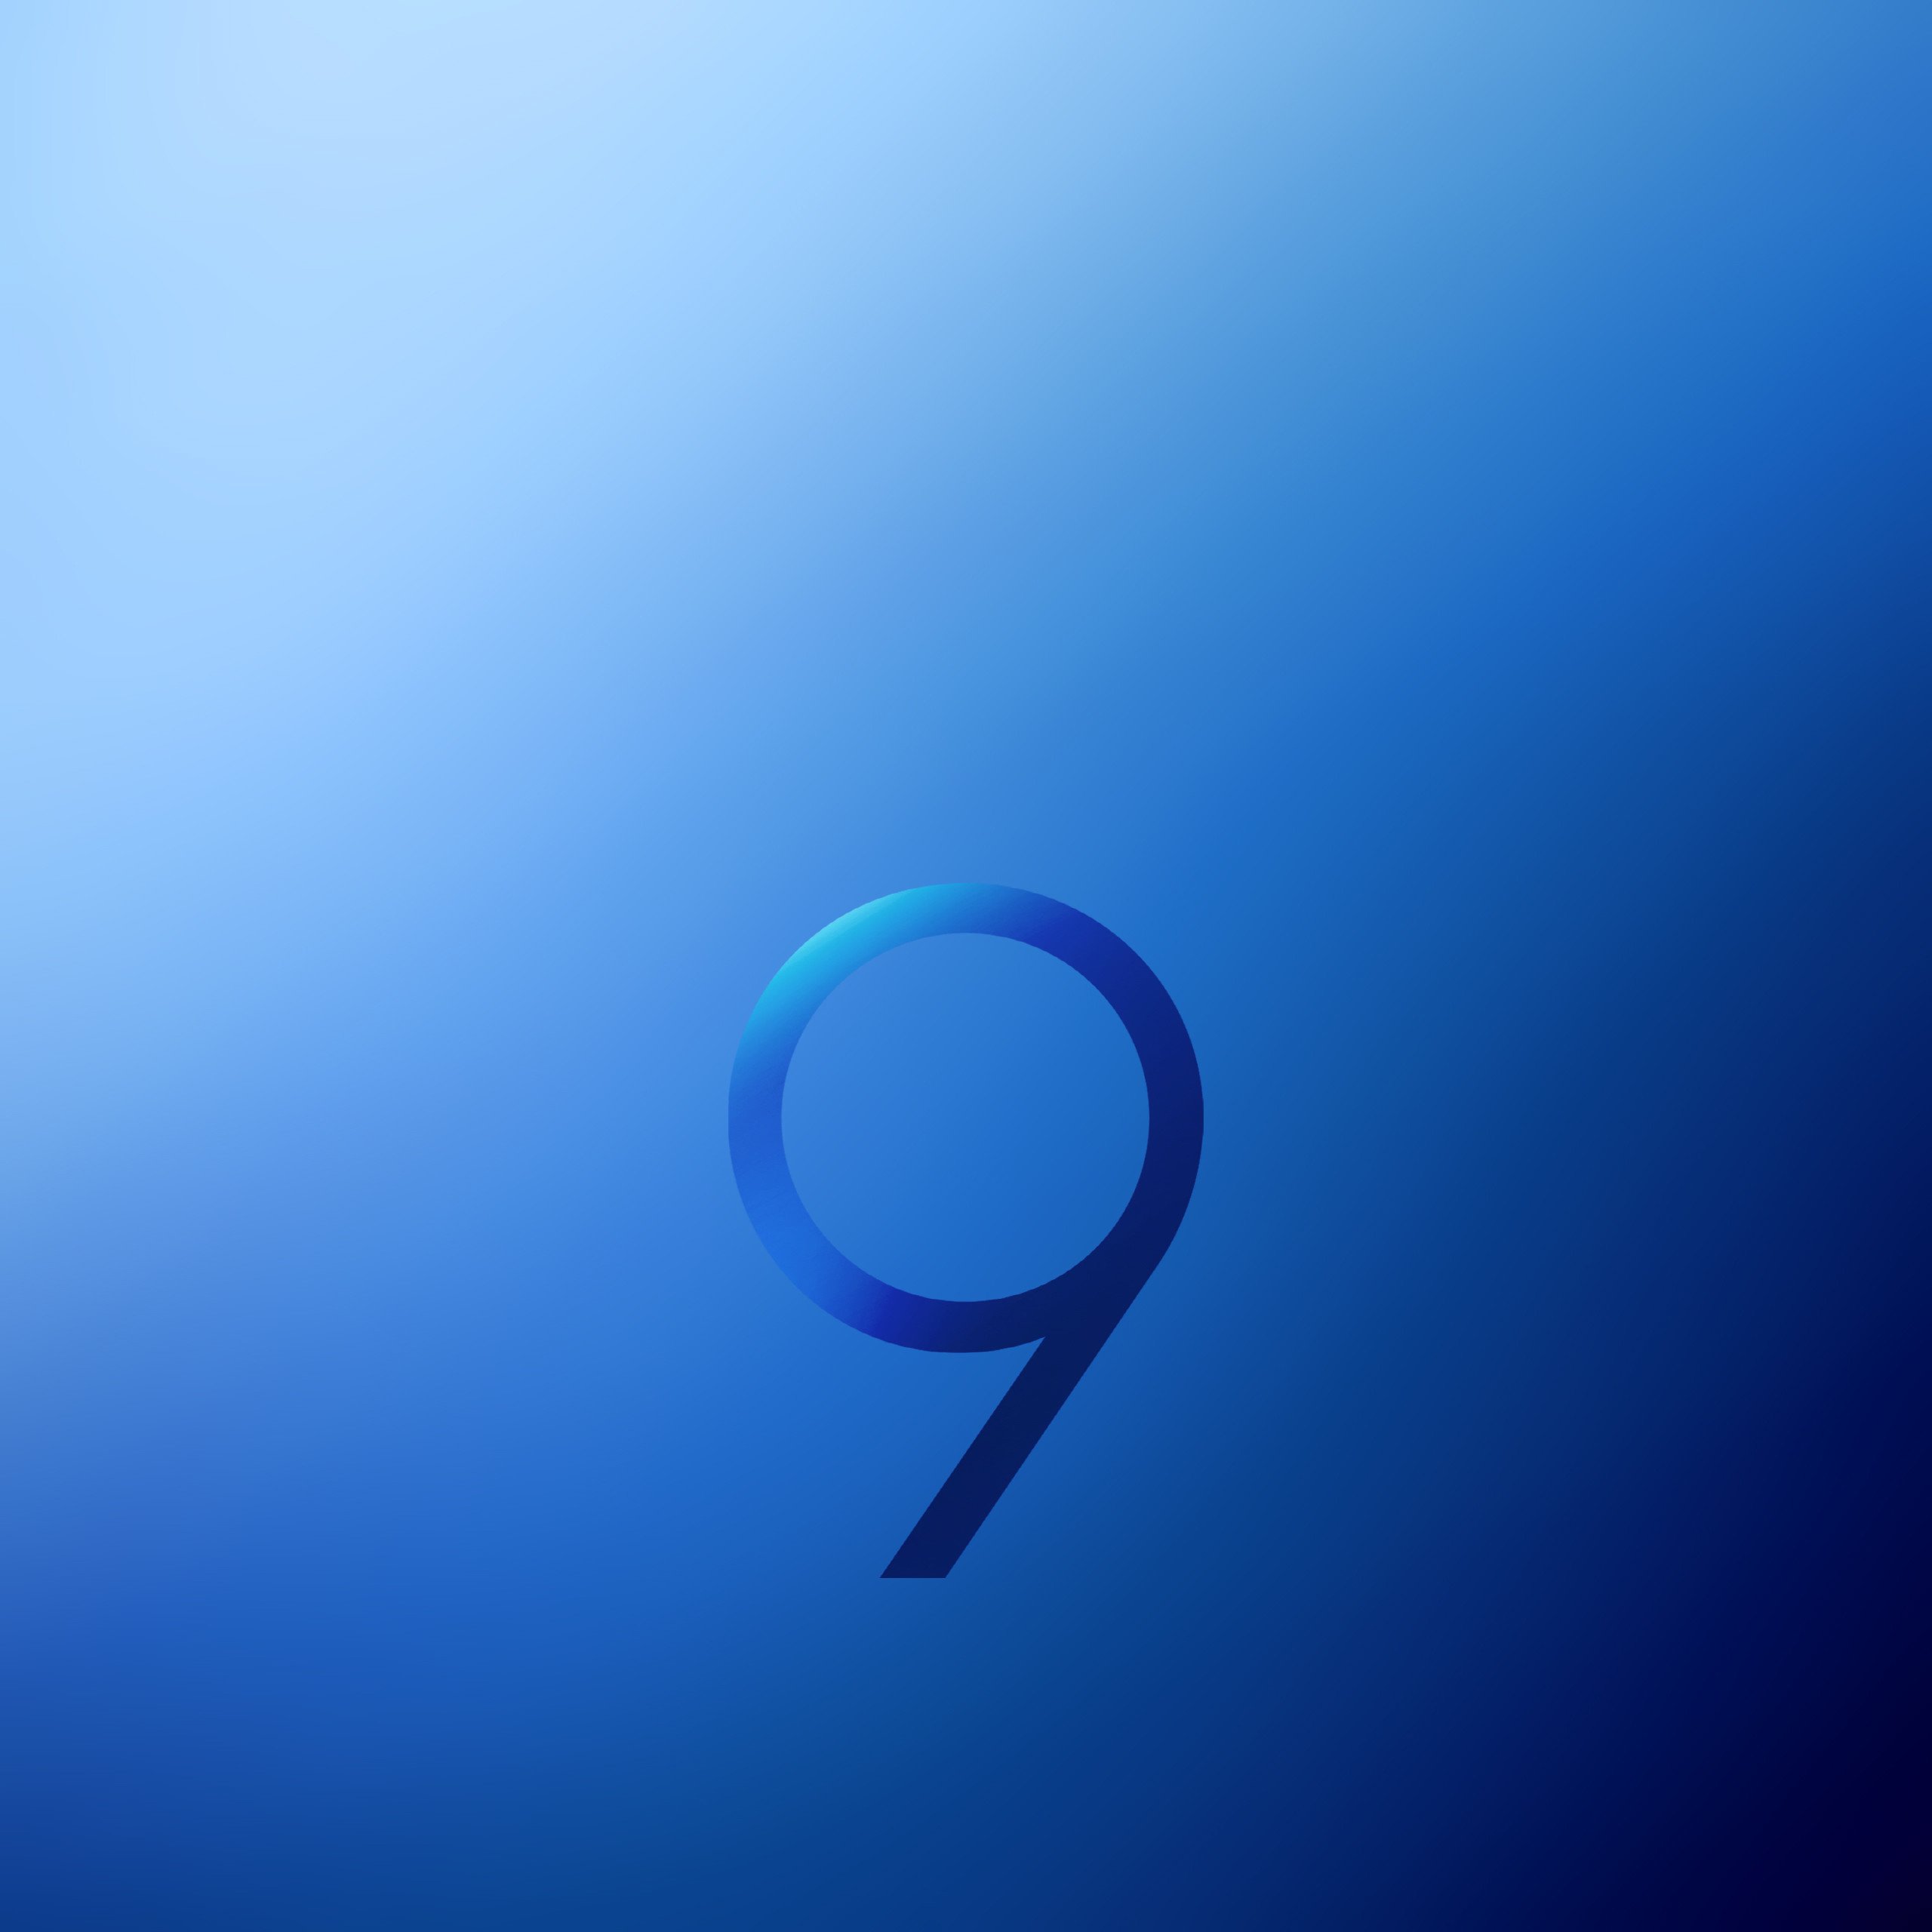 Samsung Galaxy S9 Plus Wallpapers